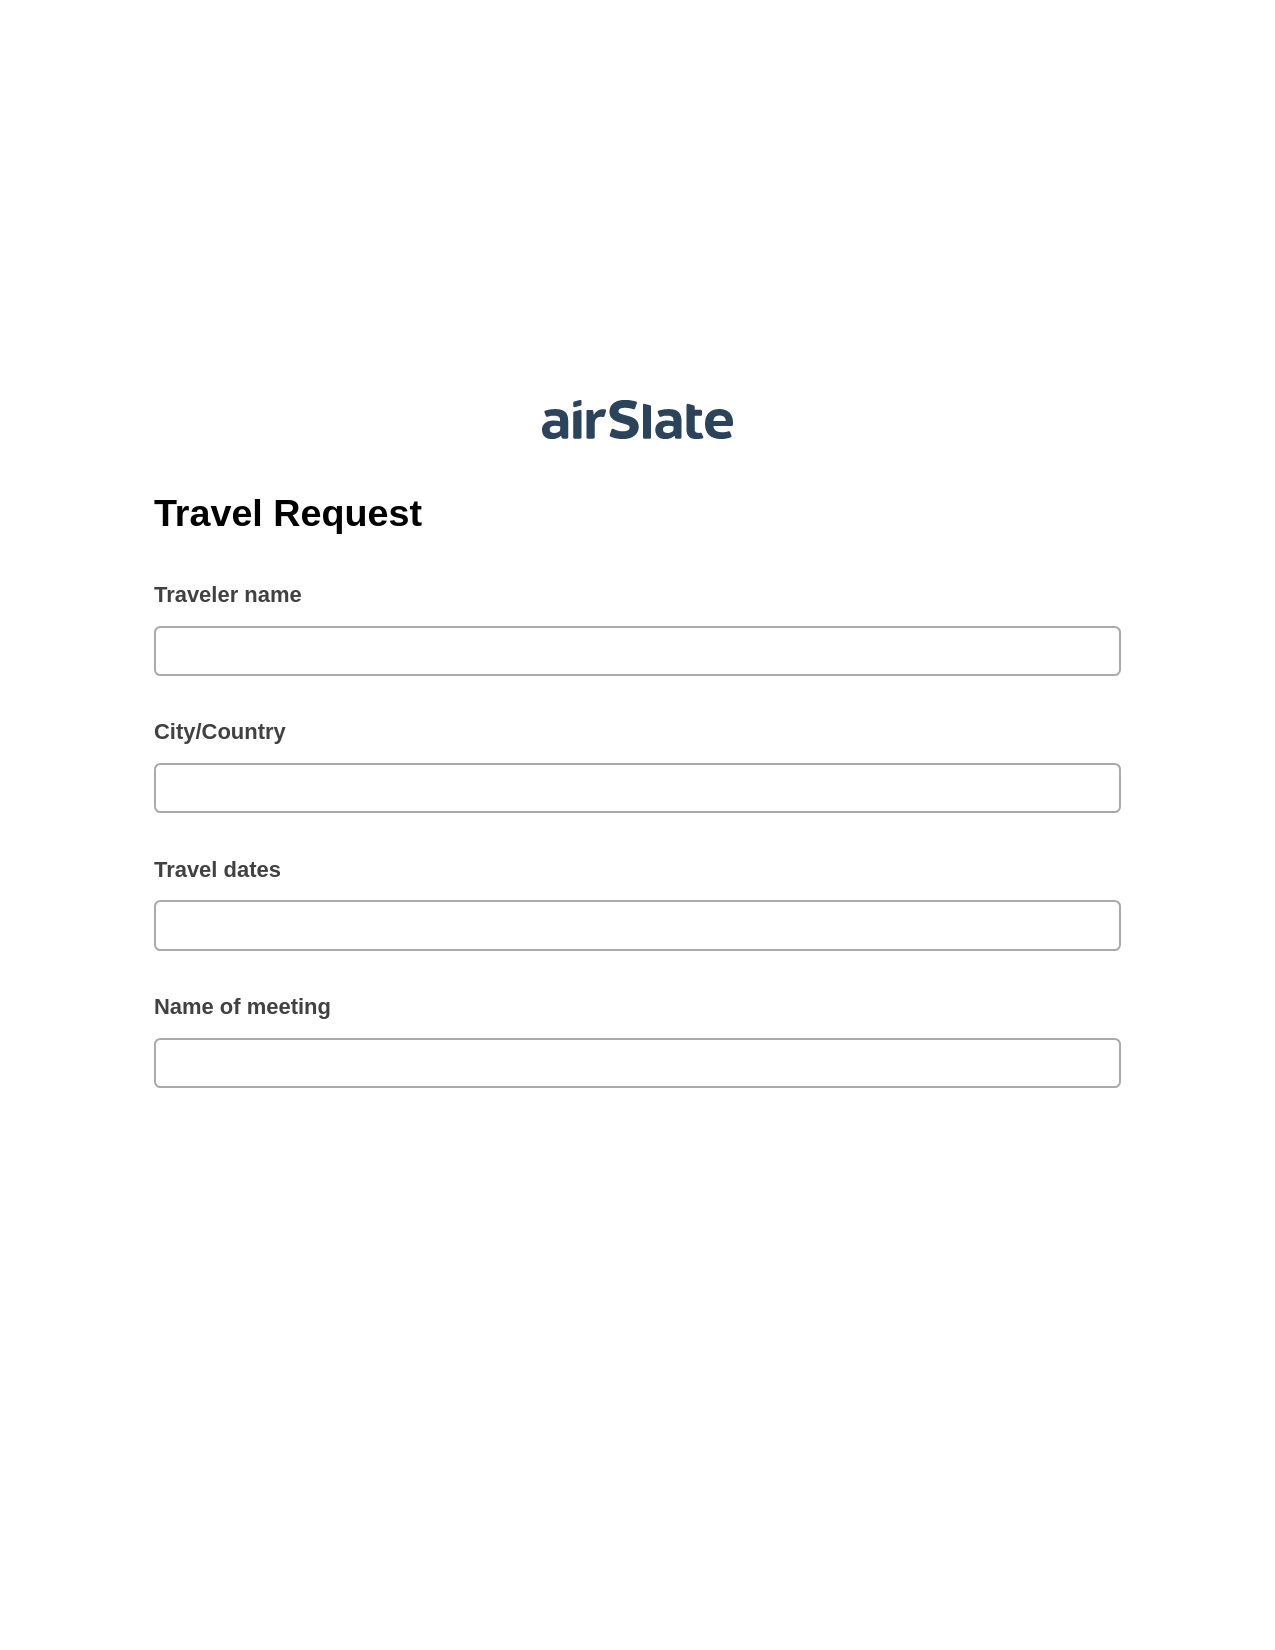 Travel Request Pre-fill Slate from MS Dynamics 365 Records Bot, Create NetSuite Records Bot, Export to Google Sheet Bot